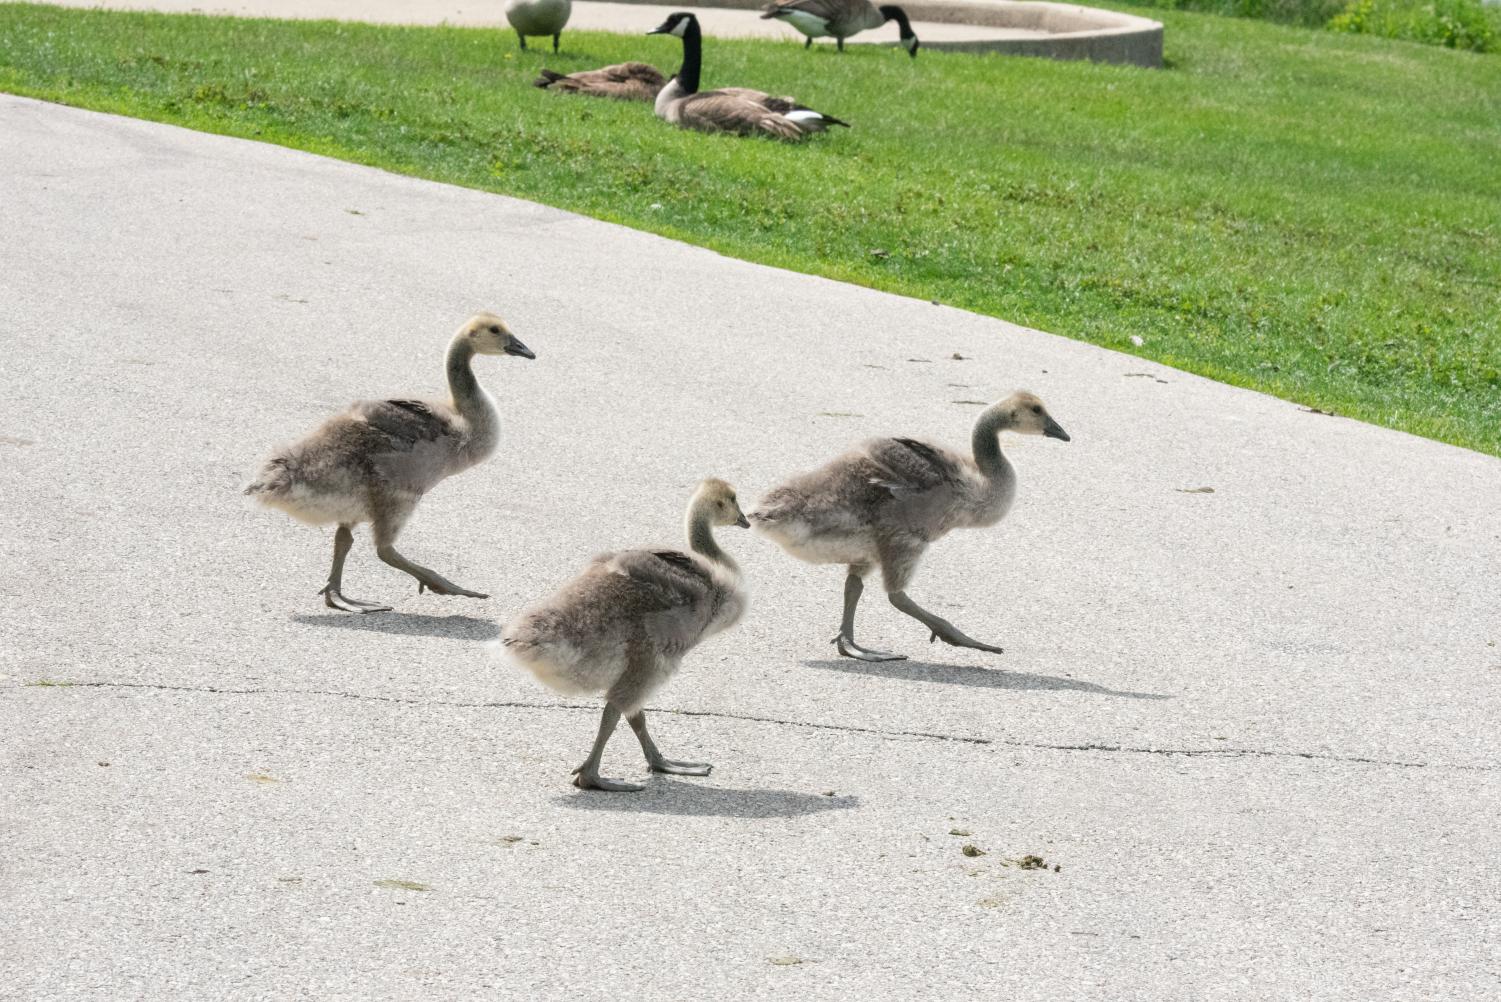 Three goslings walk on pavement. Geese sit and stand on grass in the background.